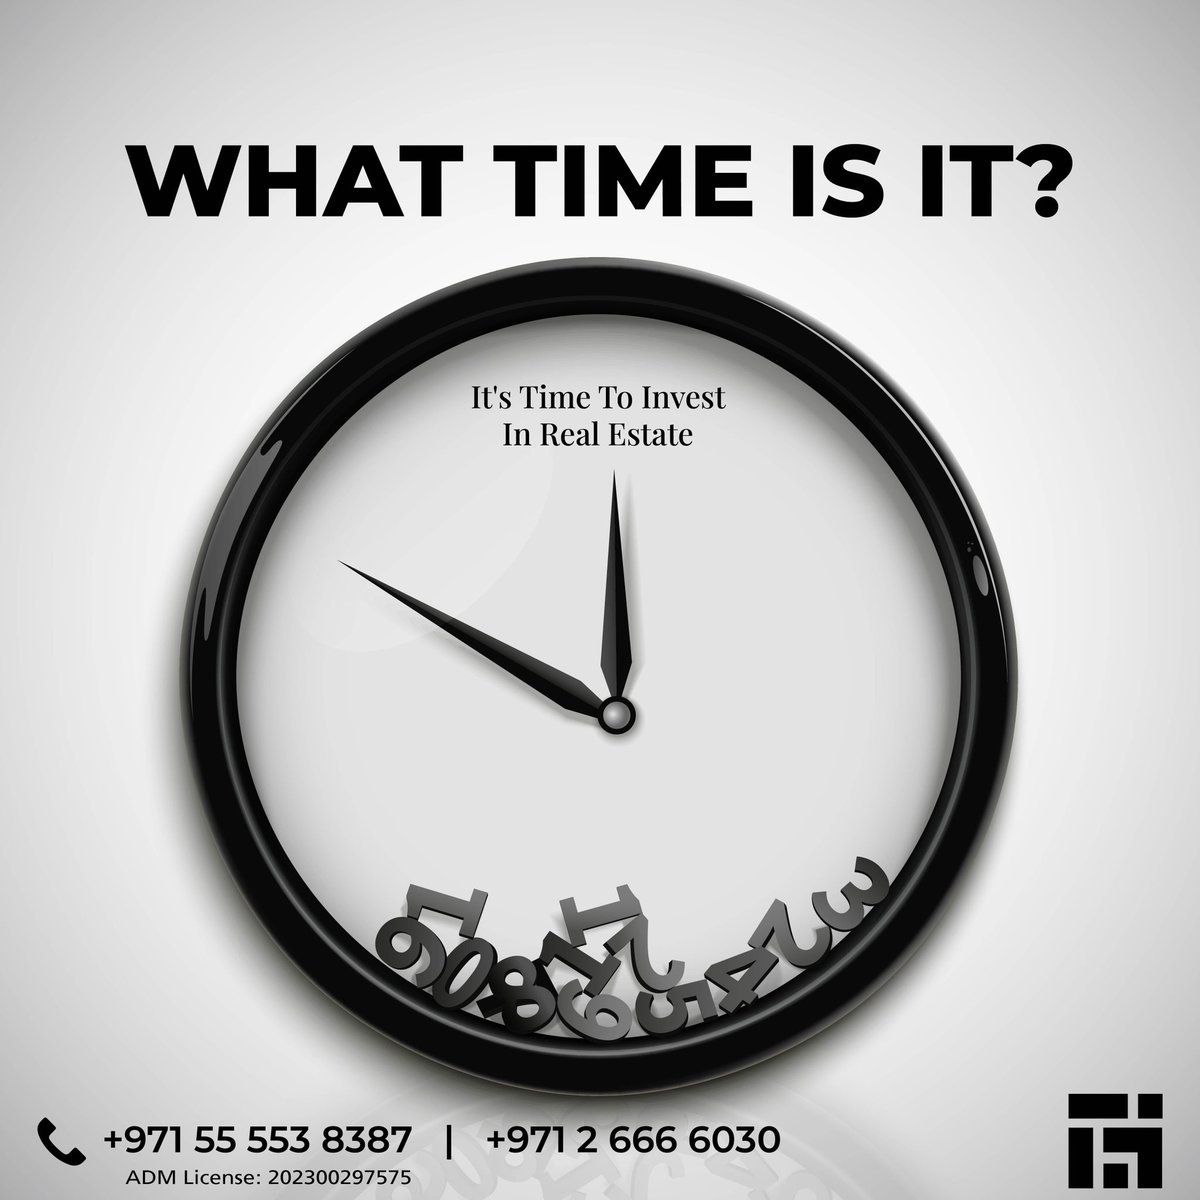 It’s time to invest in real estate Contact us today to start your investment journey #sustainablehomesrealestate #sustainablehomes #abudhabi #propertymanagement #realestate